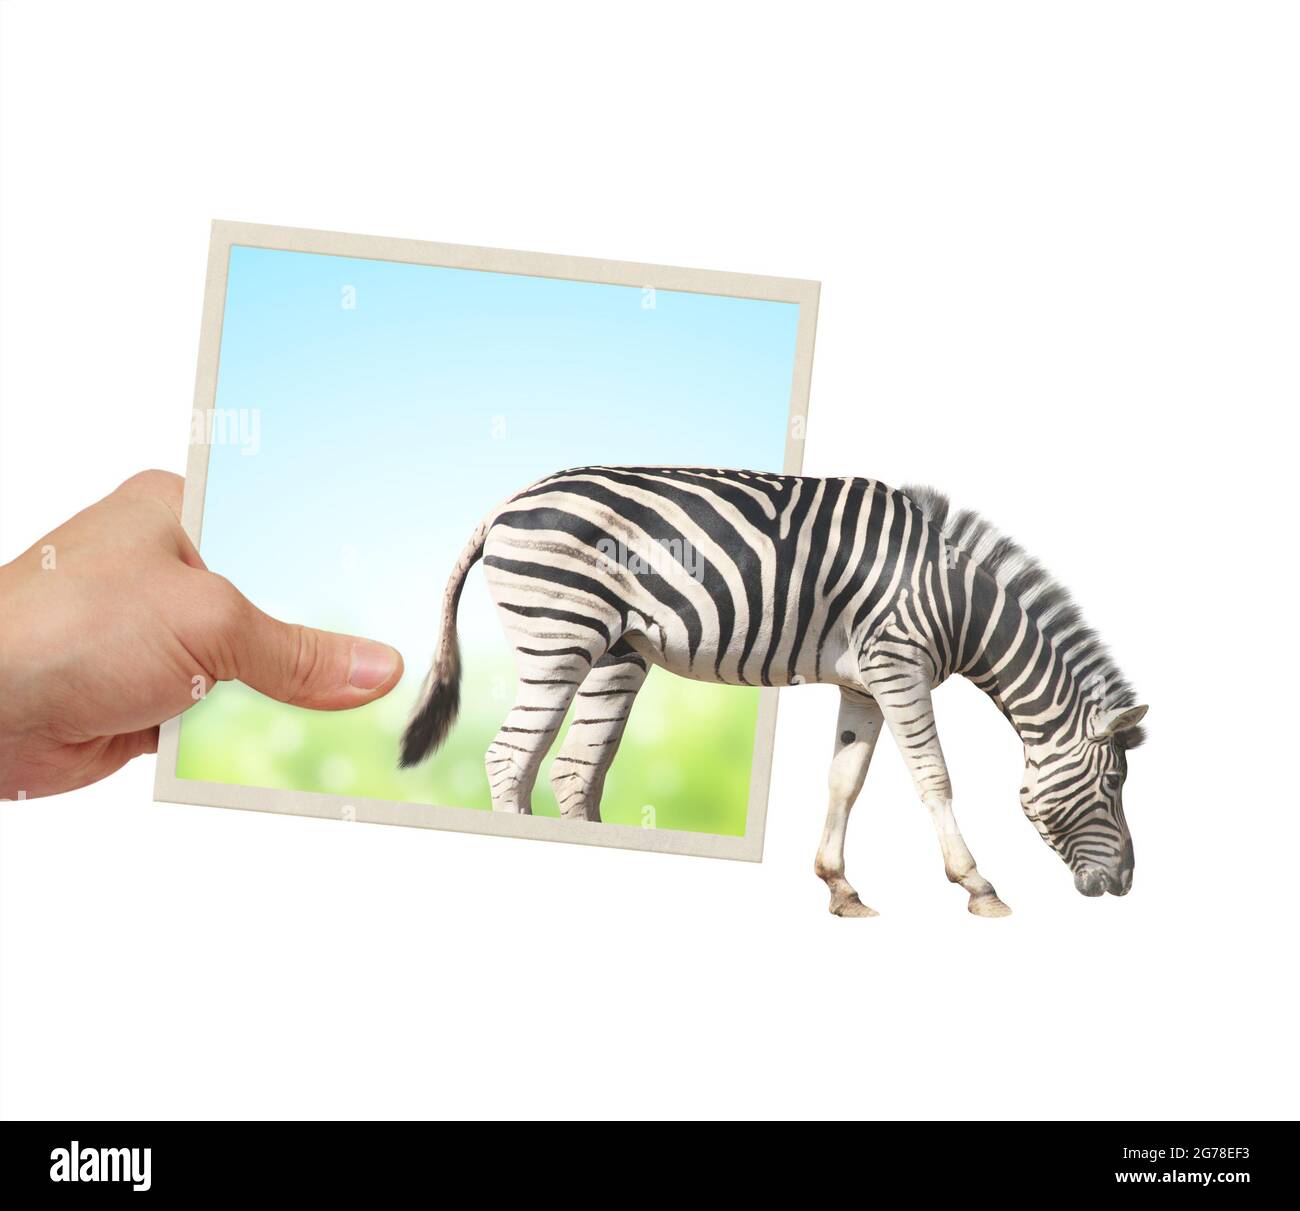 Human hand holds a photograph with zebra emerging from photography. Opportunities, nature and ecology concepts. Zebra walking through photo frame. Iso Stock Photo